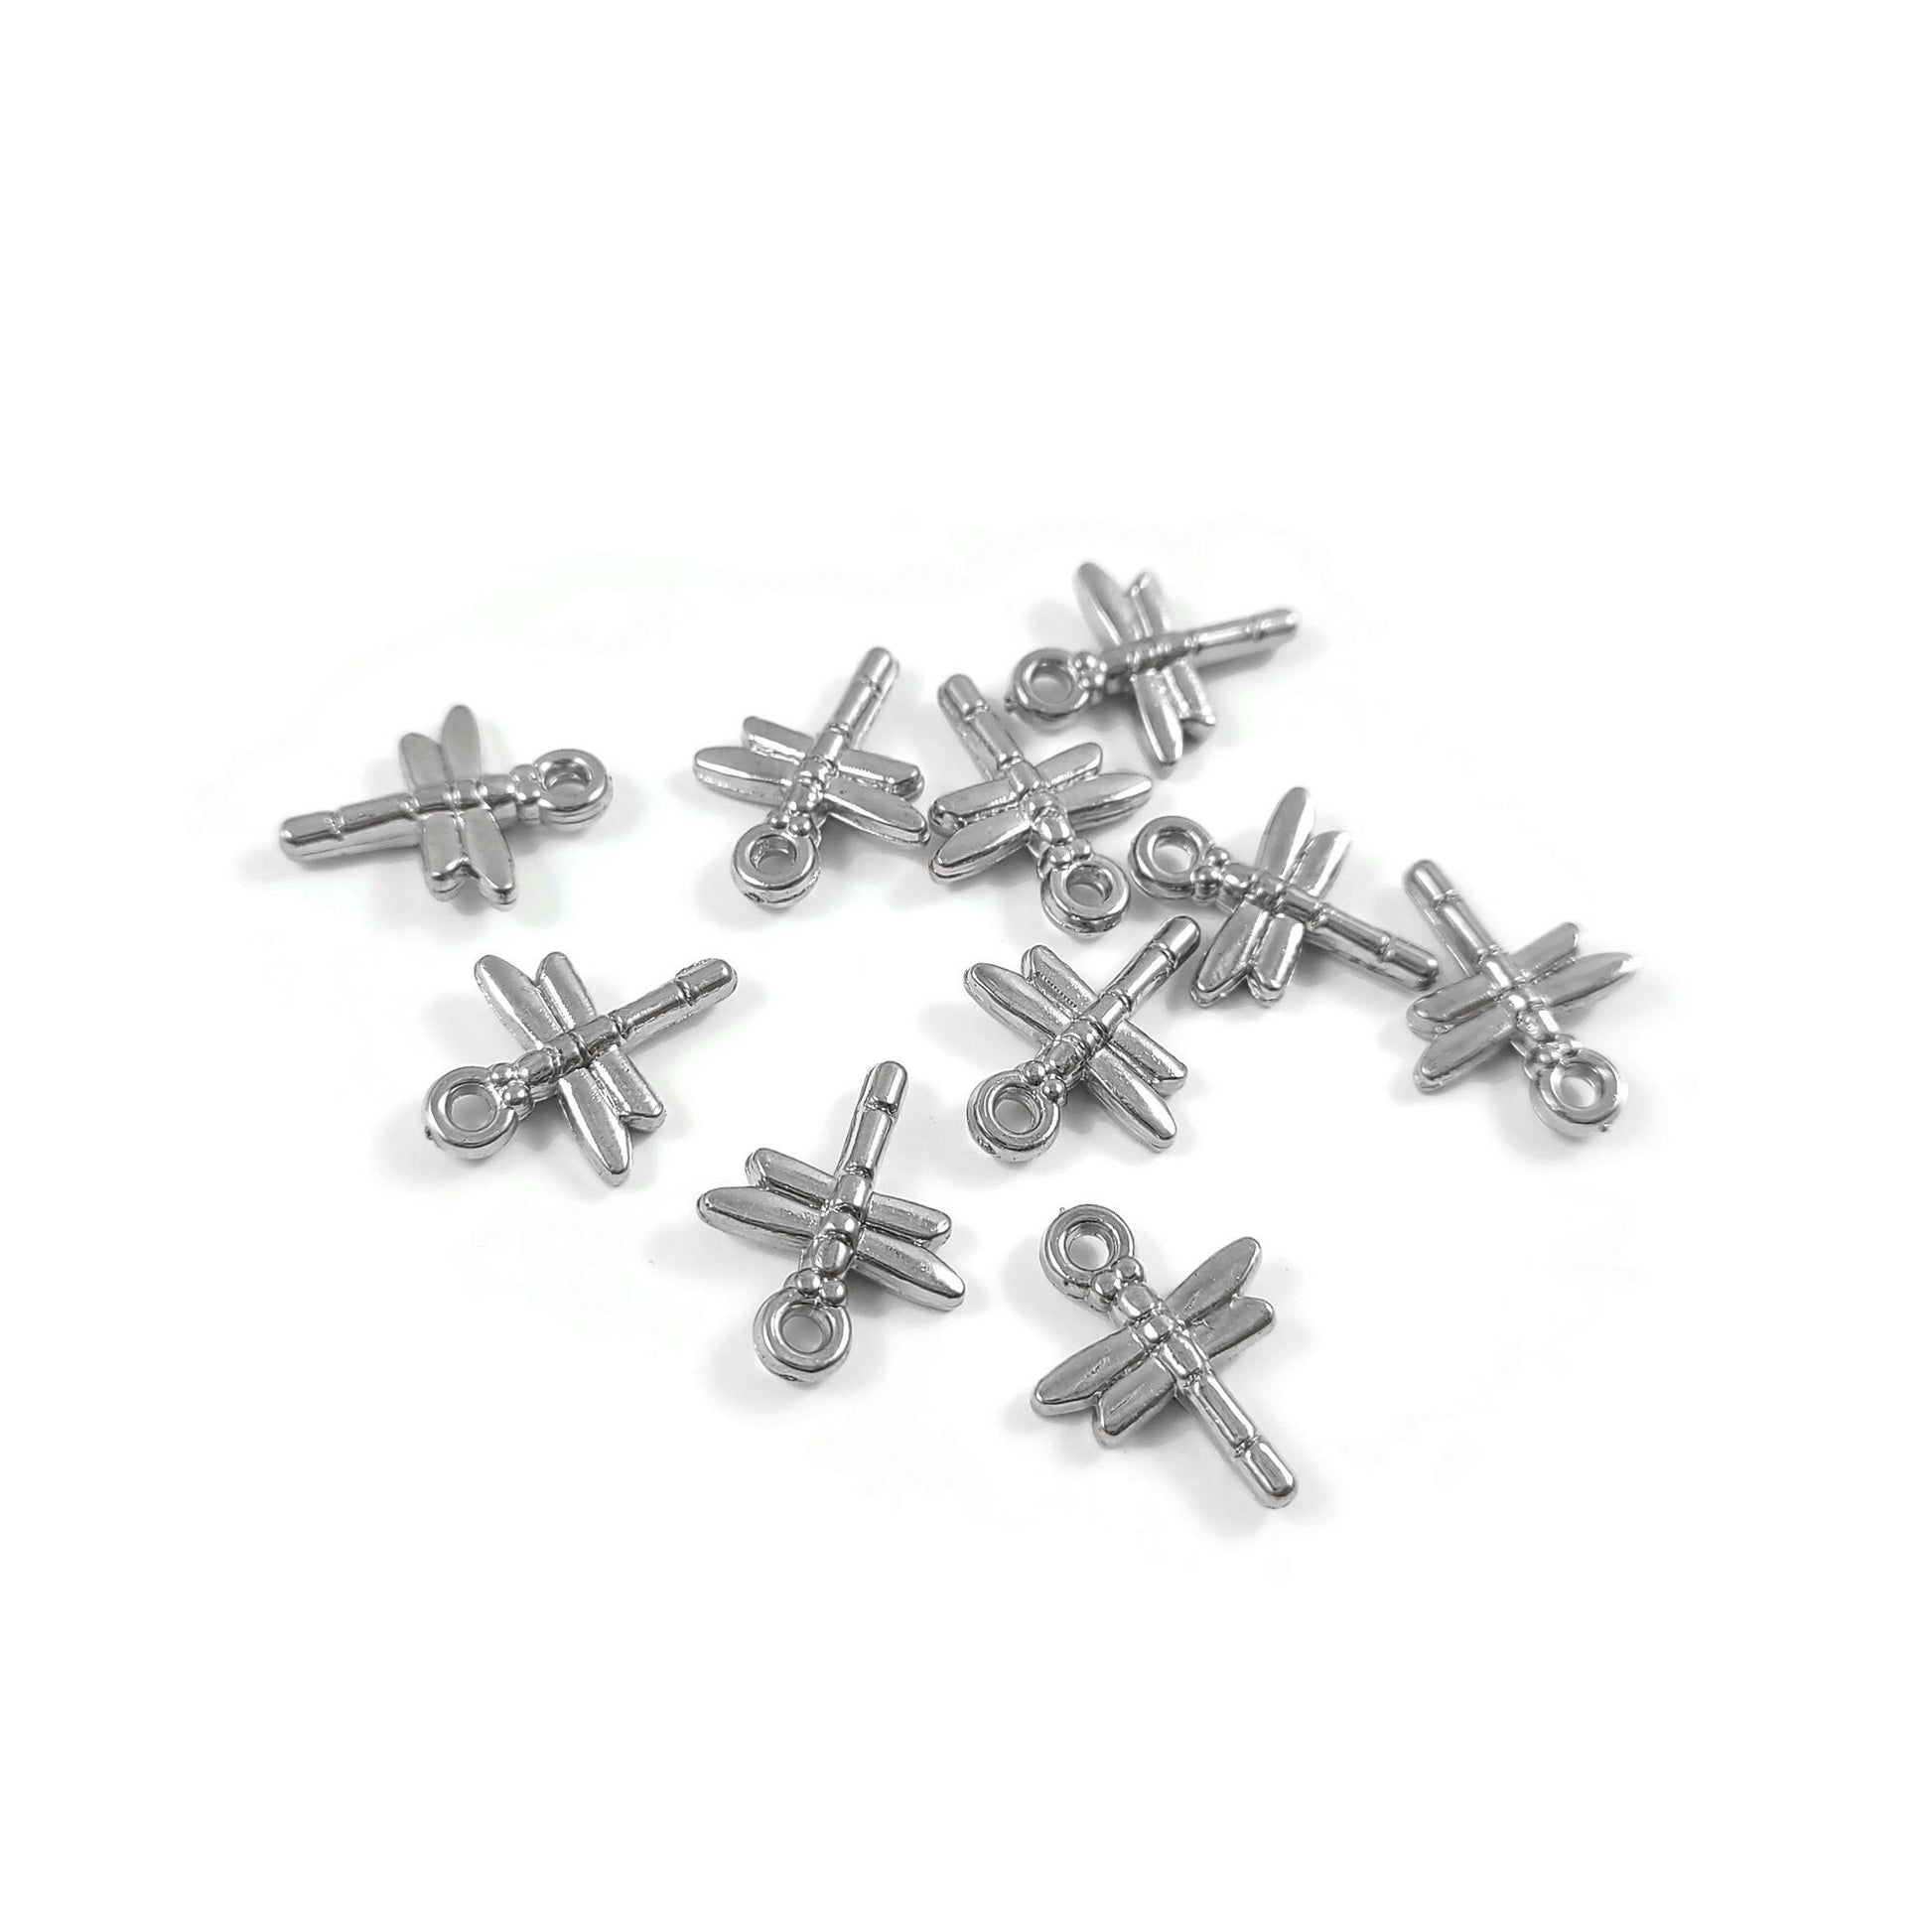 Acrylic dragonfly charms, Silver insect charms, Small pendants for jewelry making, Earring or bracelet charms